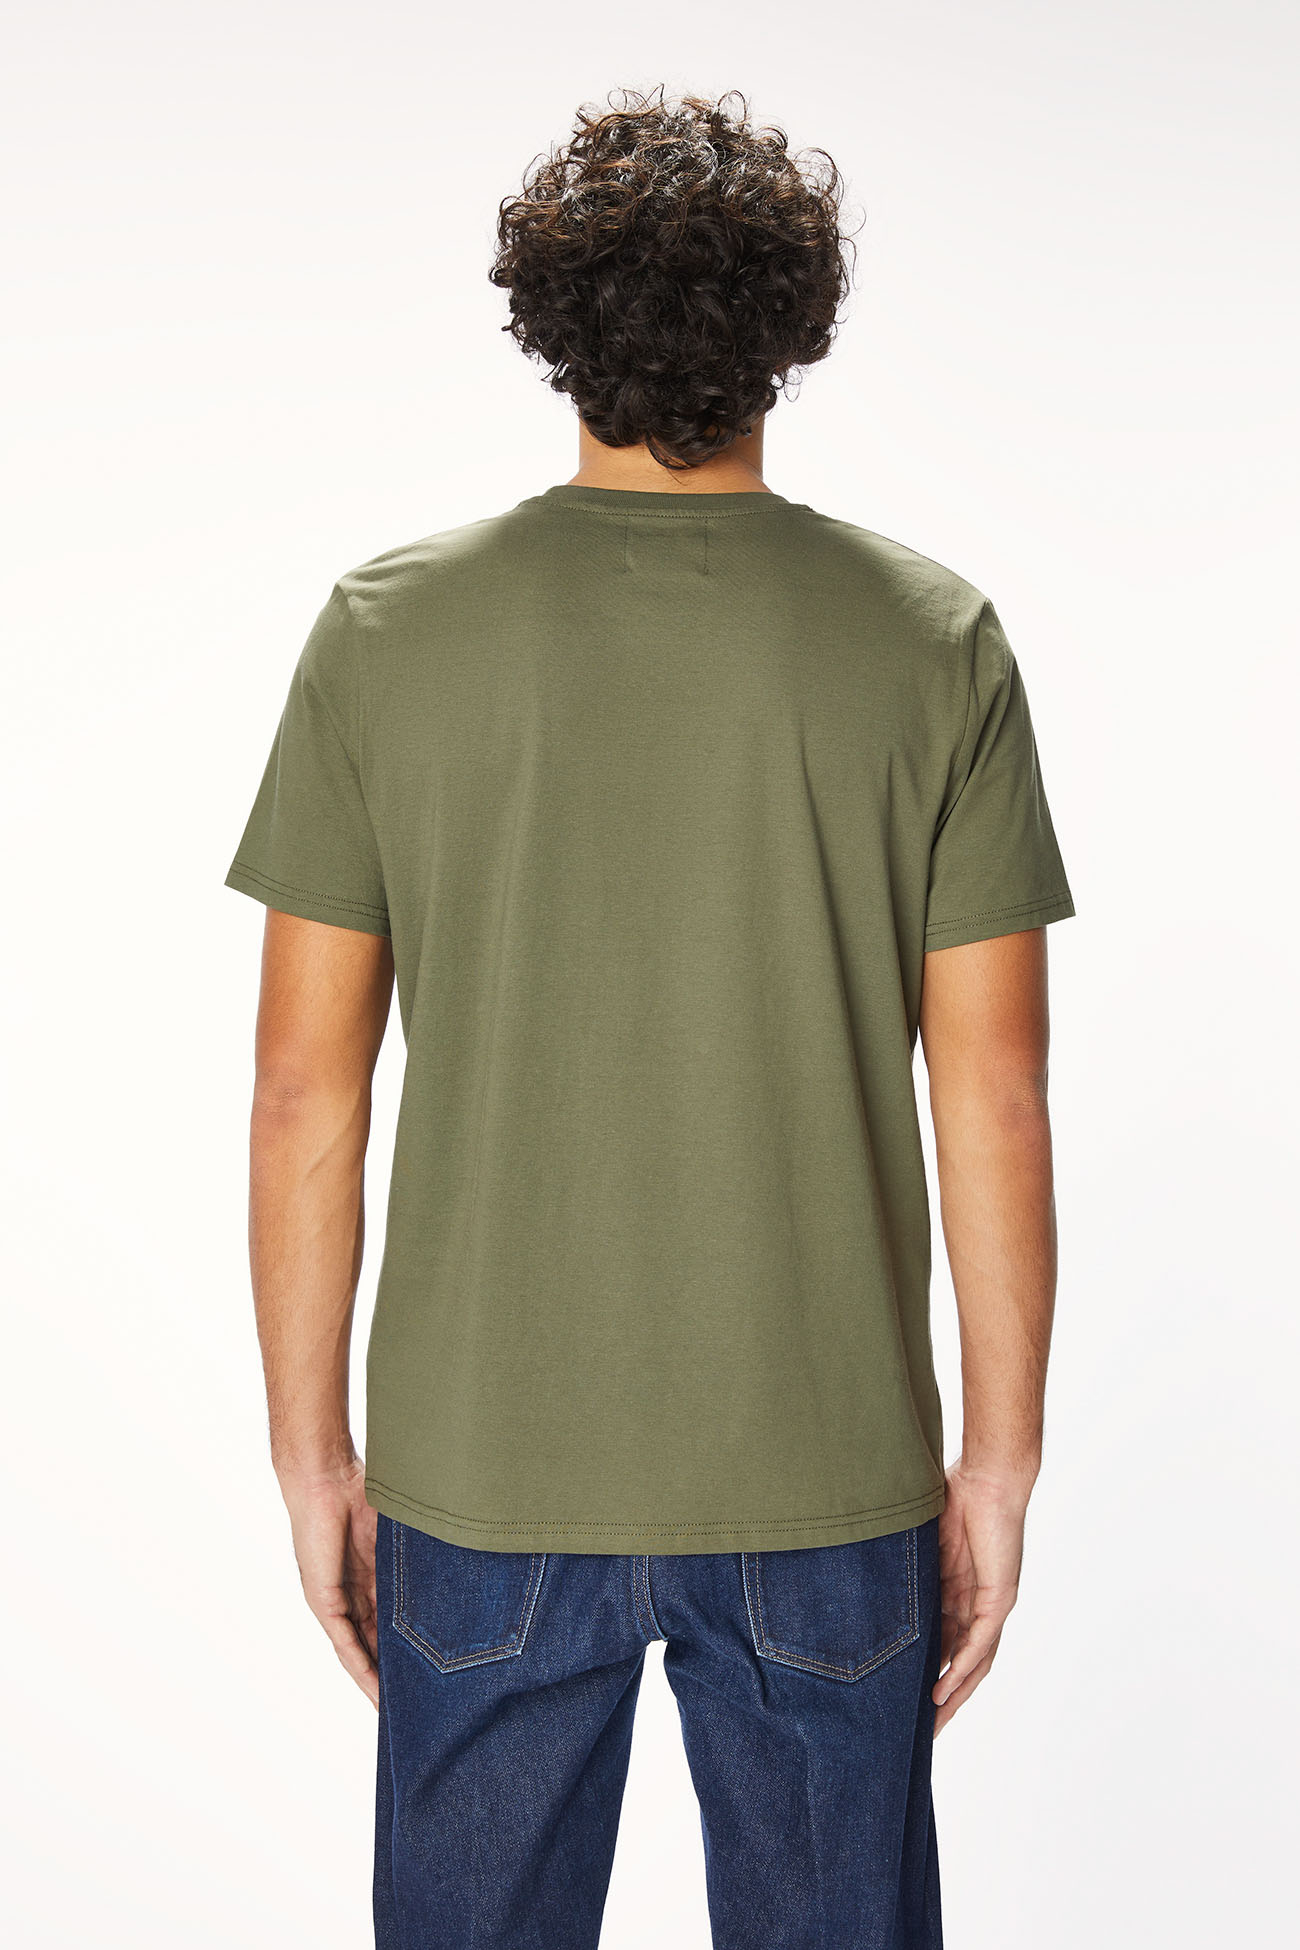 T-SHIRT 7026 MADE IN COTTON  - OLIVE GREEN - OOF WEAR